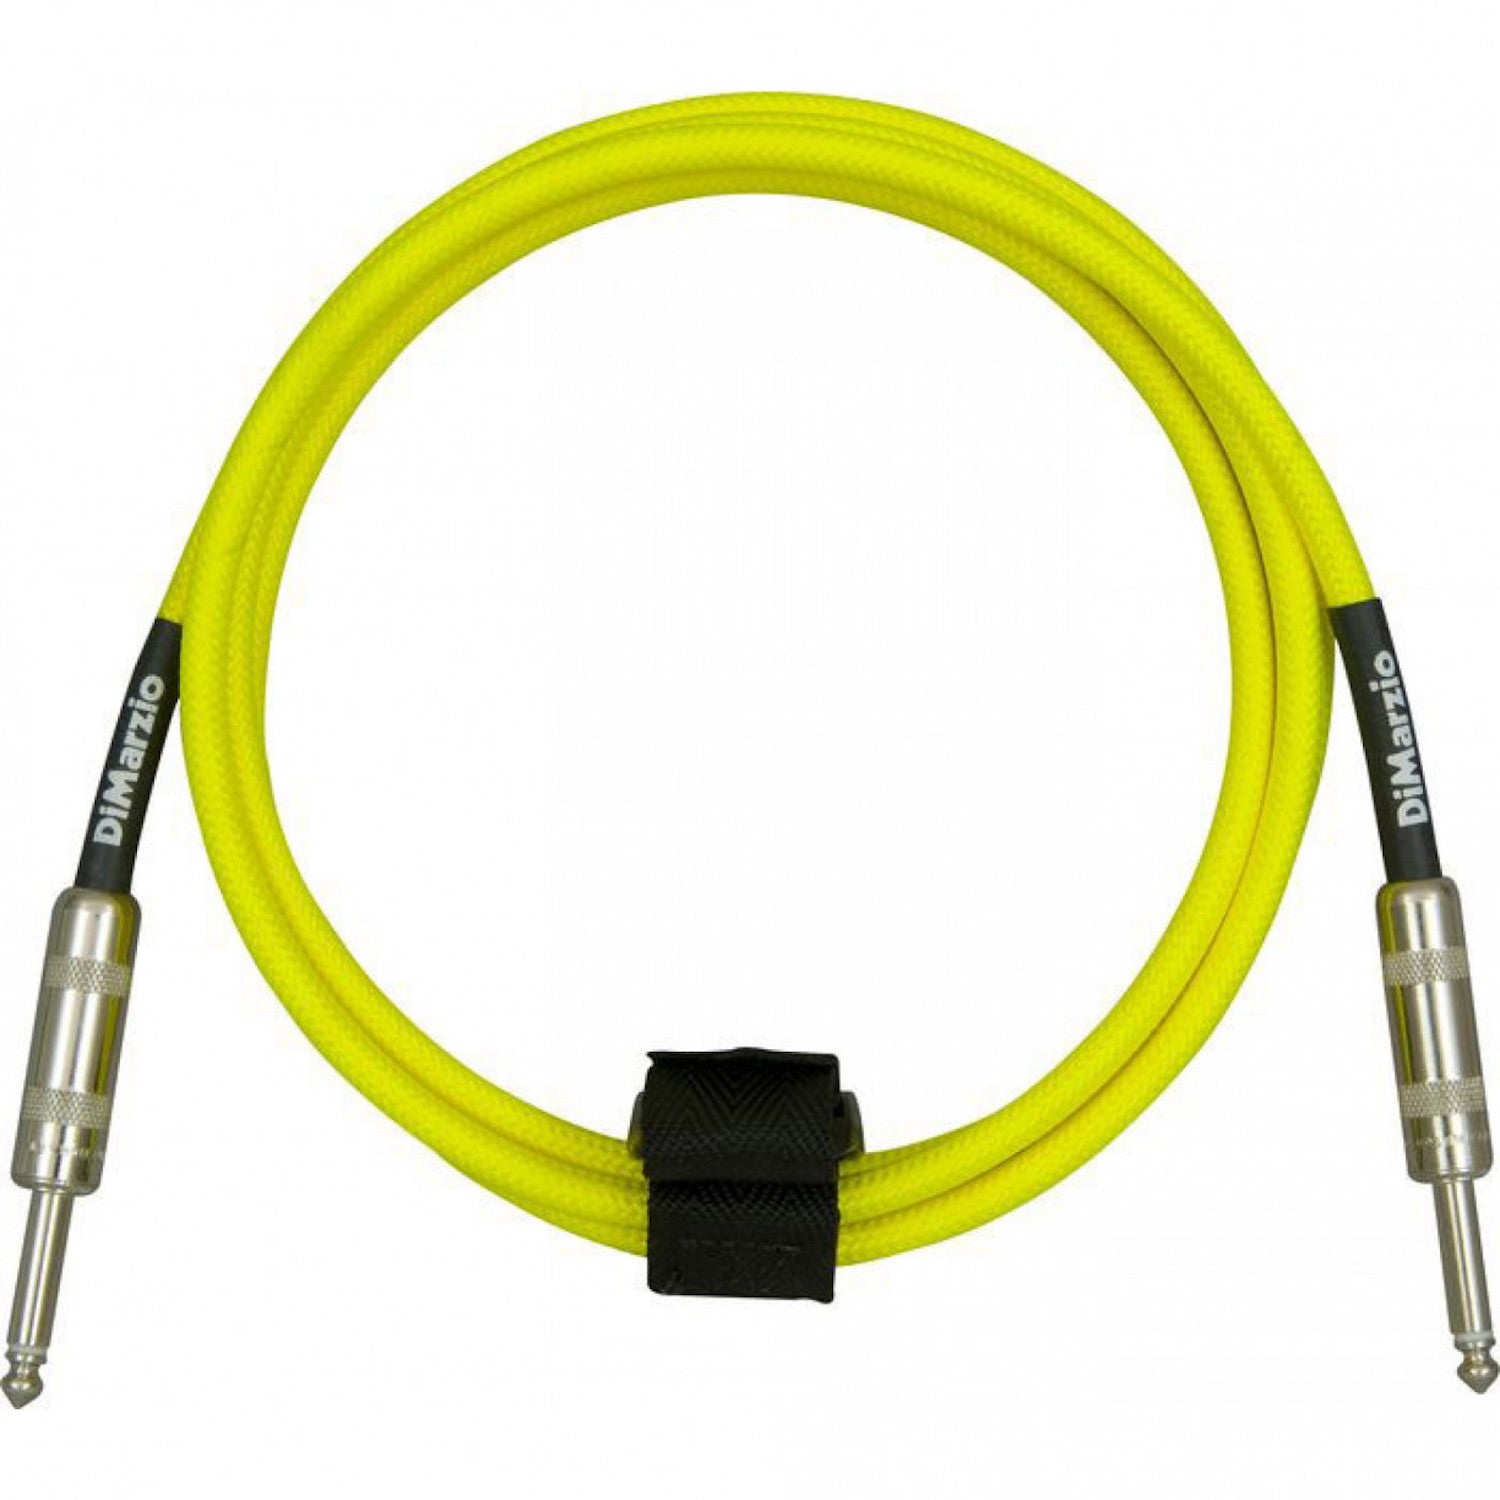 Dimarzio EP1710NY Over Braided Cable 10' Neon Yellow